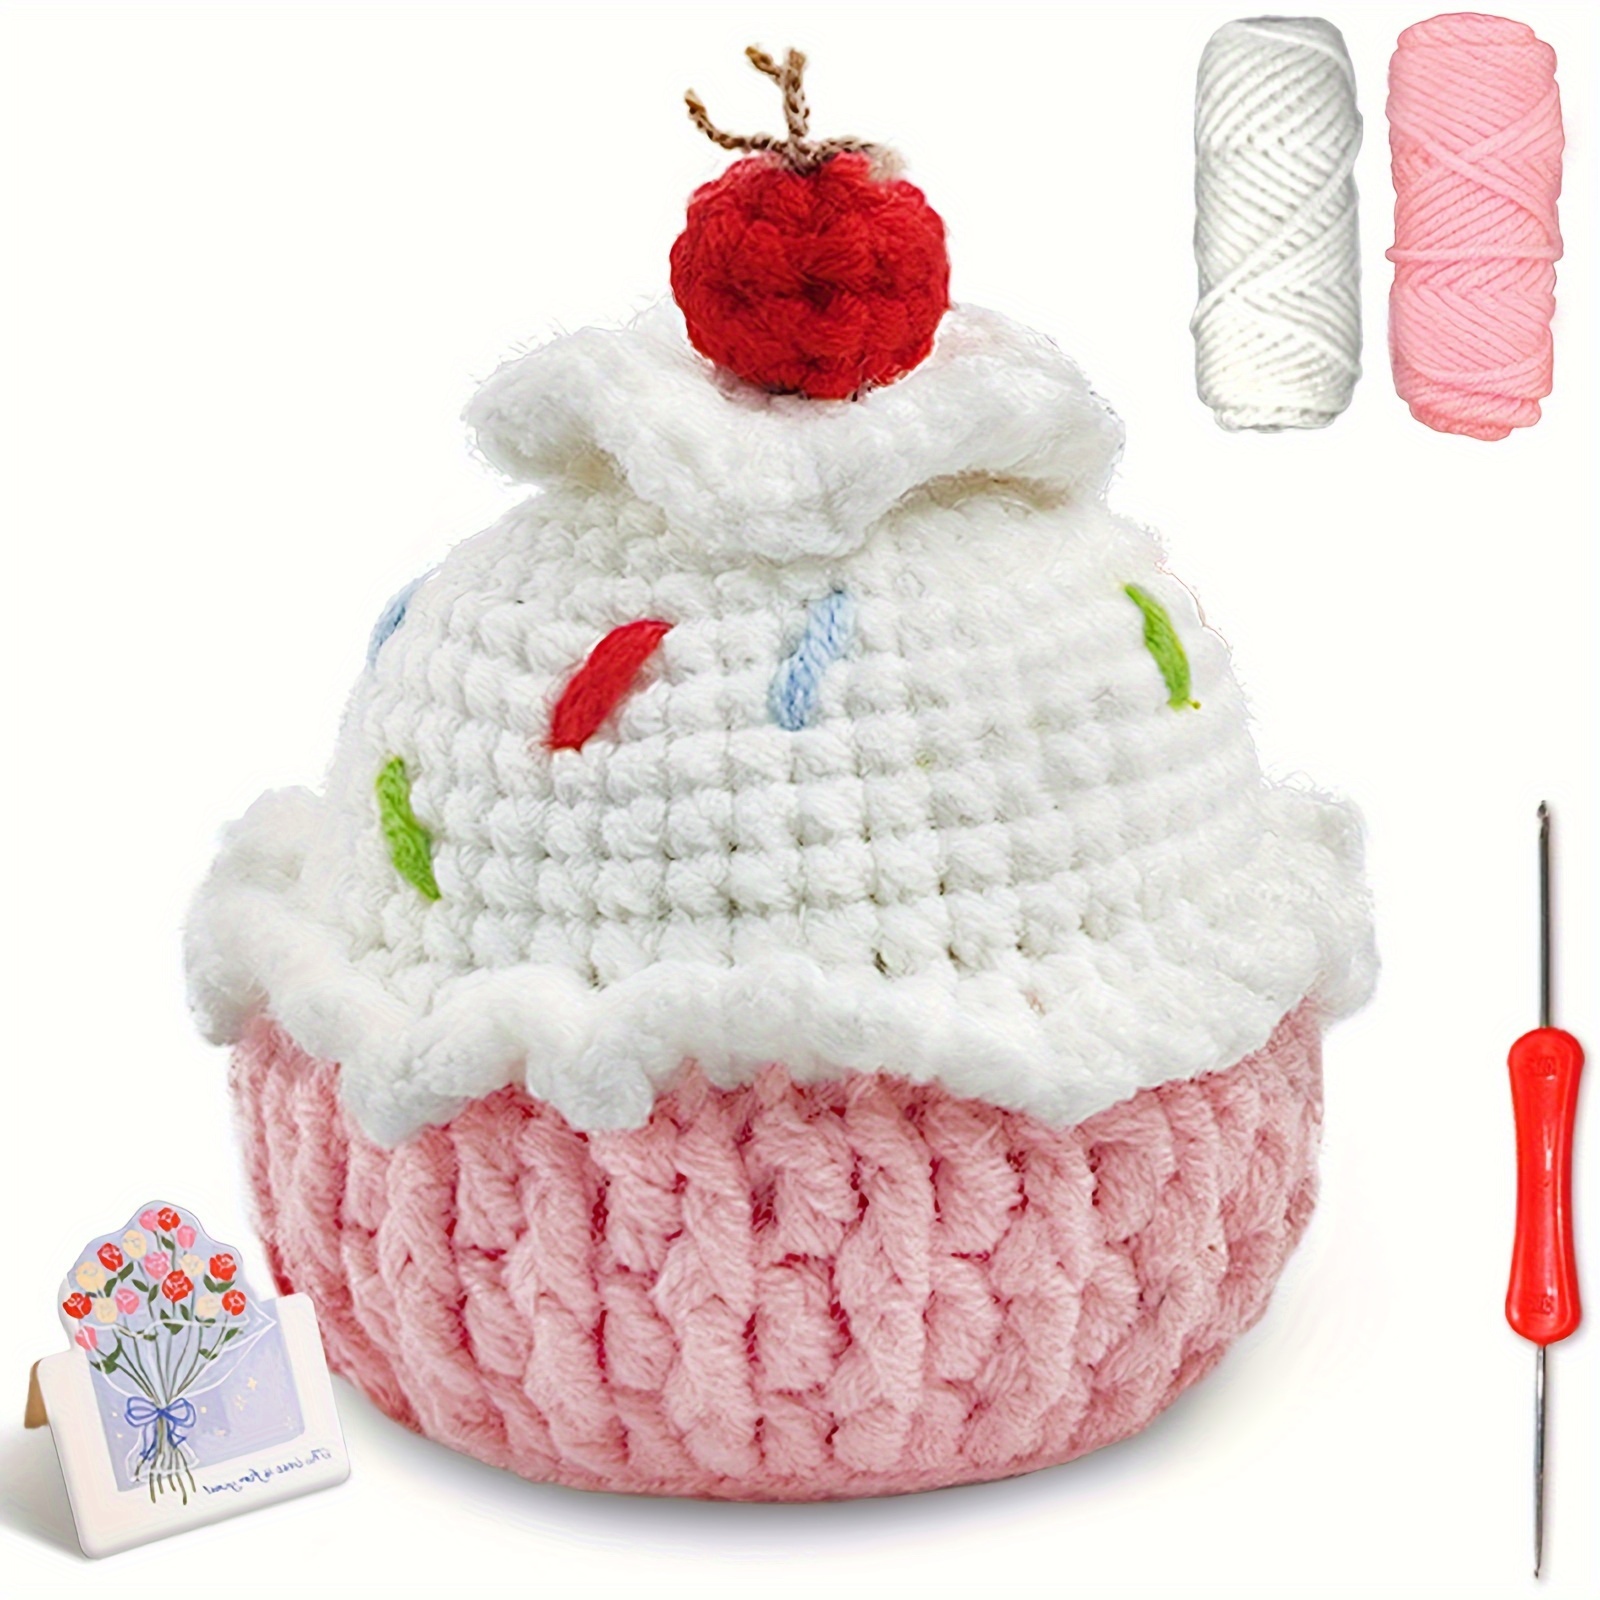 

1pc Beginner Crochet Kit With Video Tutorial - Amigurumi Cupcake Crochet Crafting Set, All-inclusive Knitting Starter Pack, Mixed Color Fabric Material, Ideal Diy Gift For All Seasons